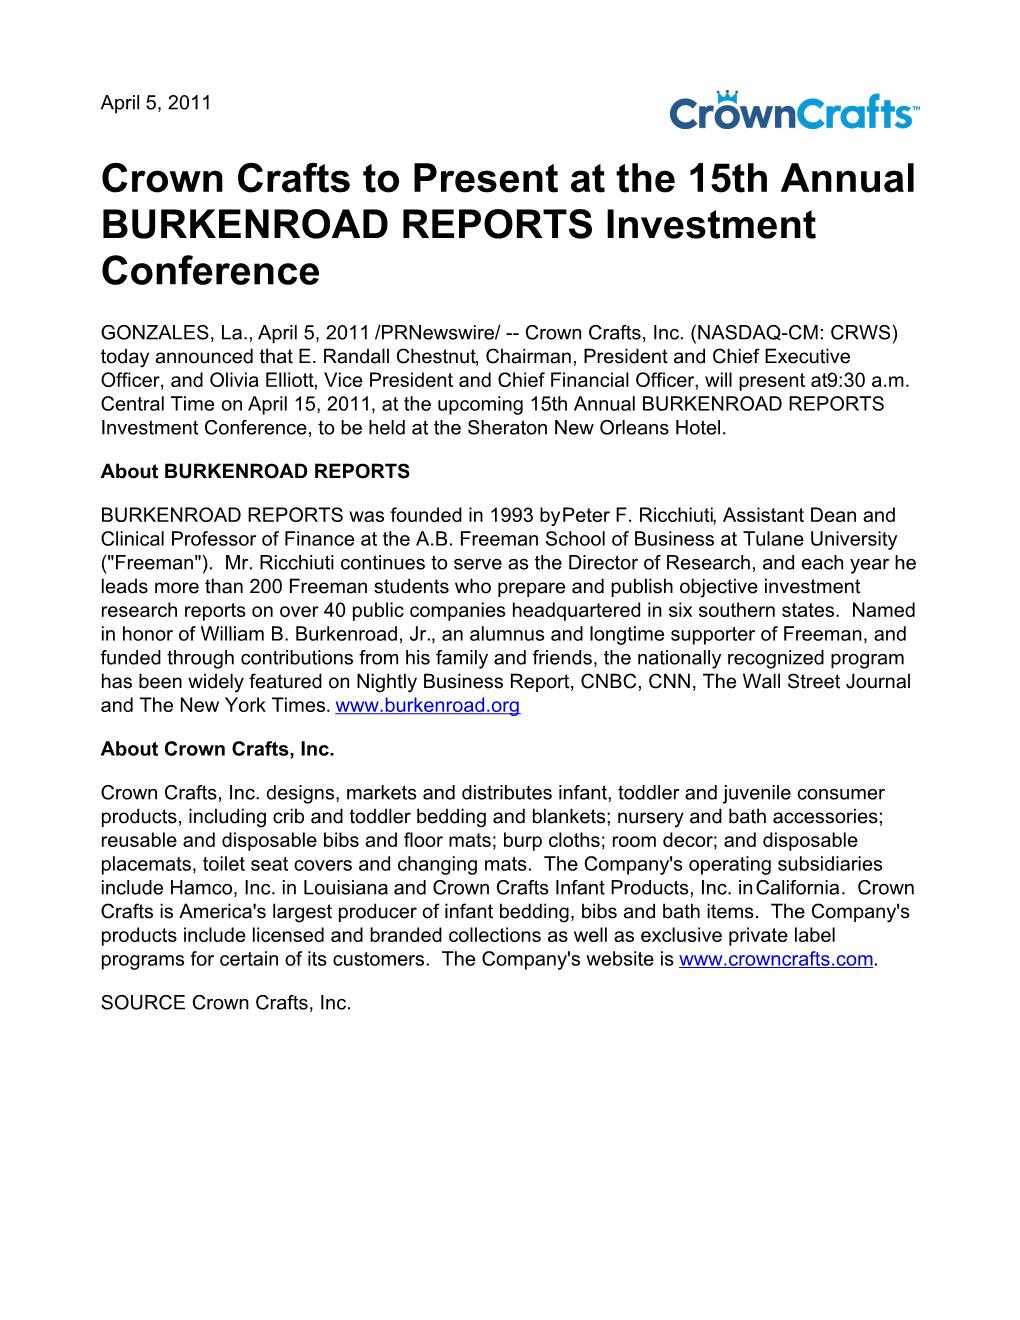 Crown Crafts to Present at the 15Th Annual BURKENROAD REPORTS Investment Conference